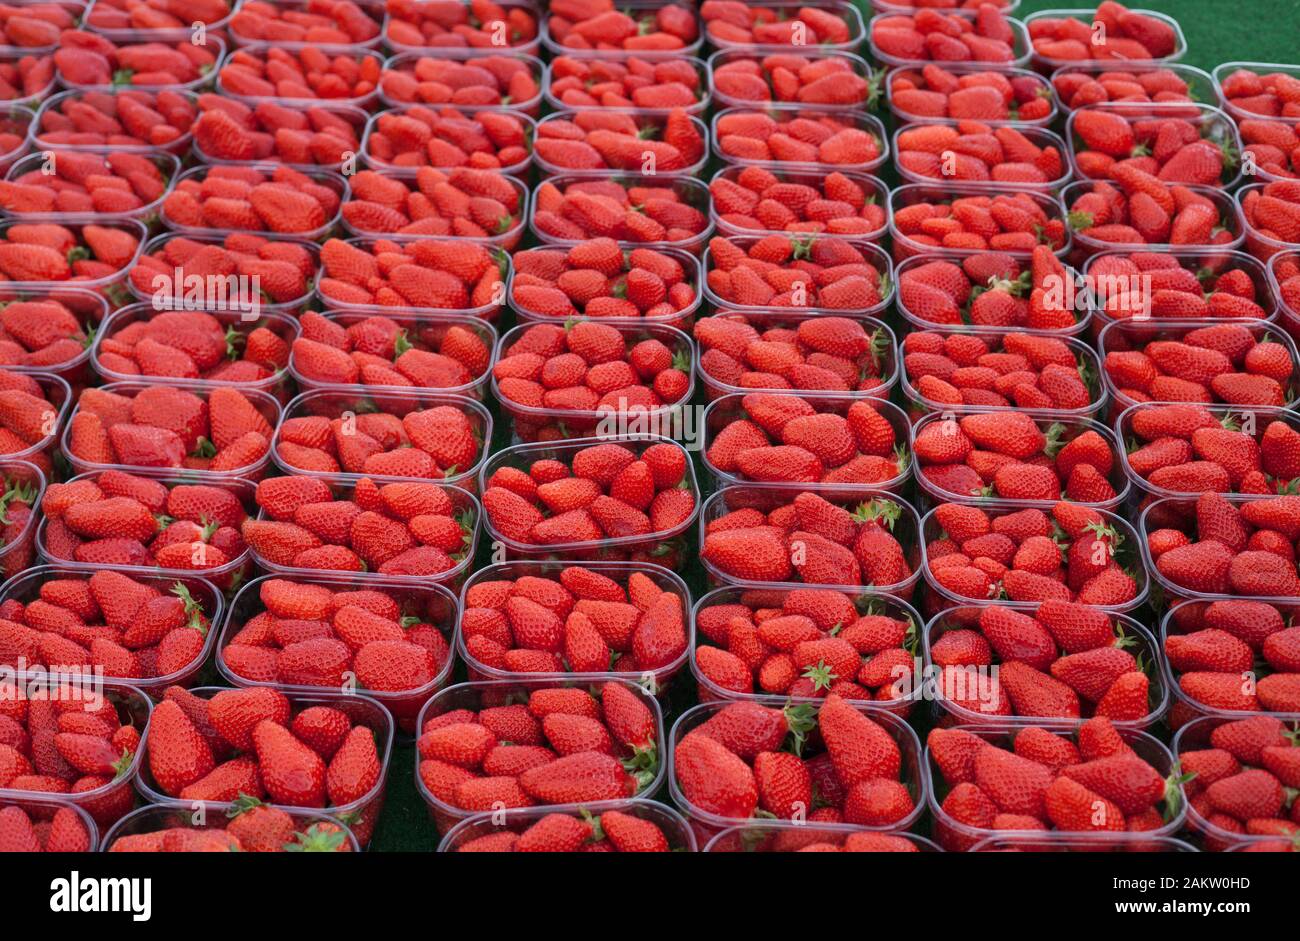 Gariguette strawberries an old French variety sold in Nay market, Pyrenees Atlantiques, Nouvelle Aquitaine, France Stock Photo